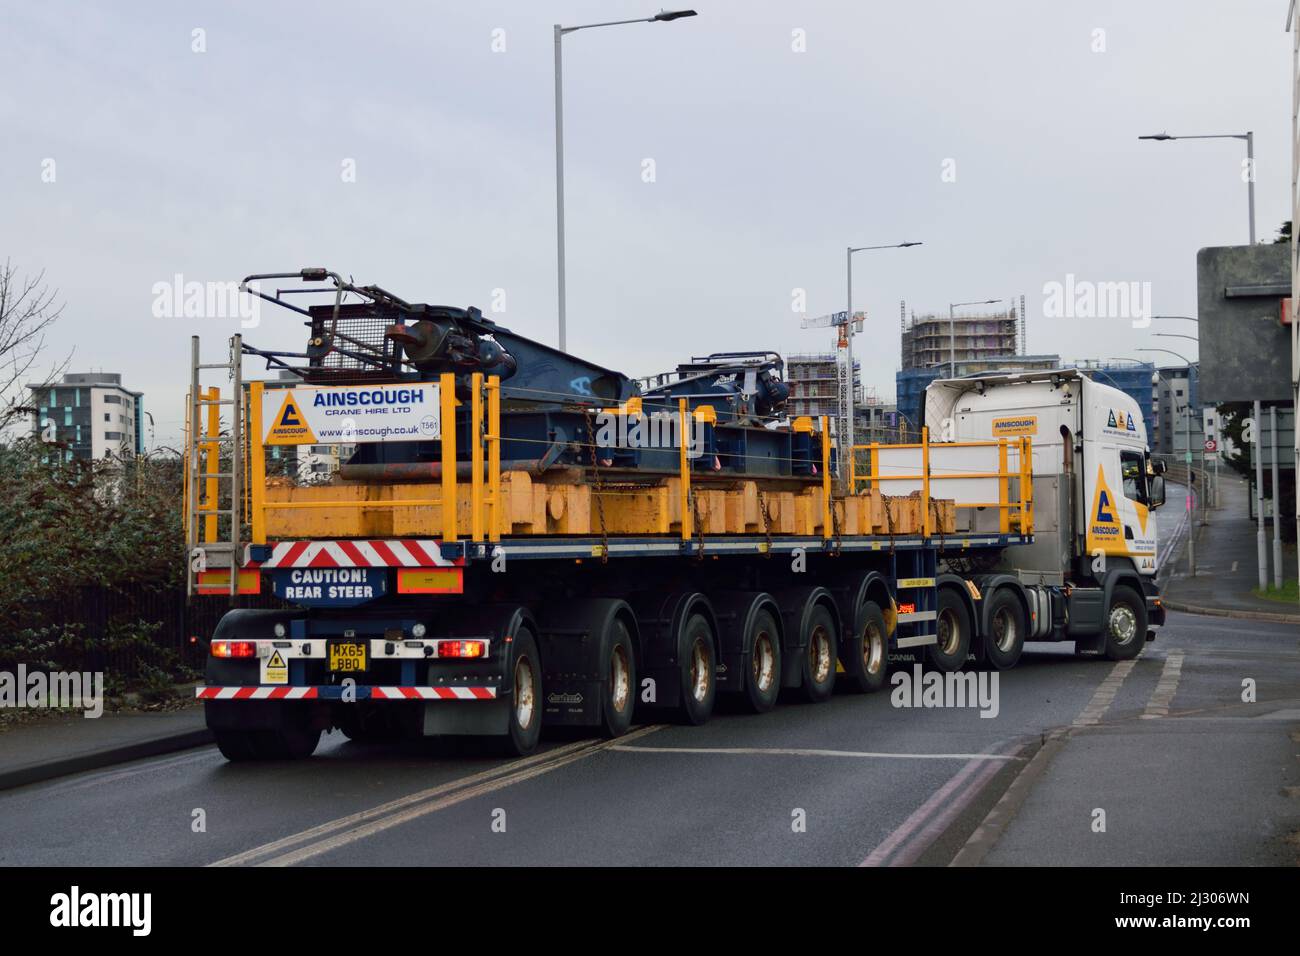 AINSCOUGH SCANIA R580 delivering elements of a LIEBHERR LG1550 to site Stock Photo